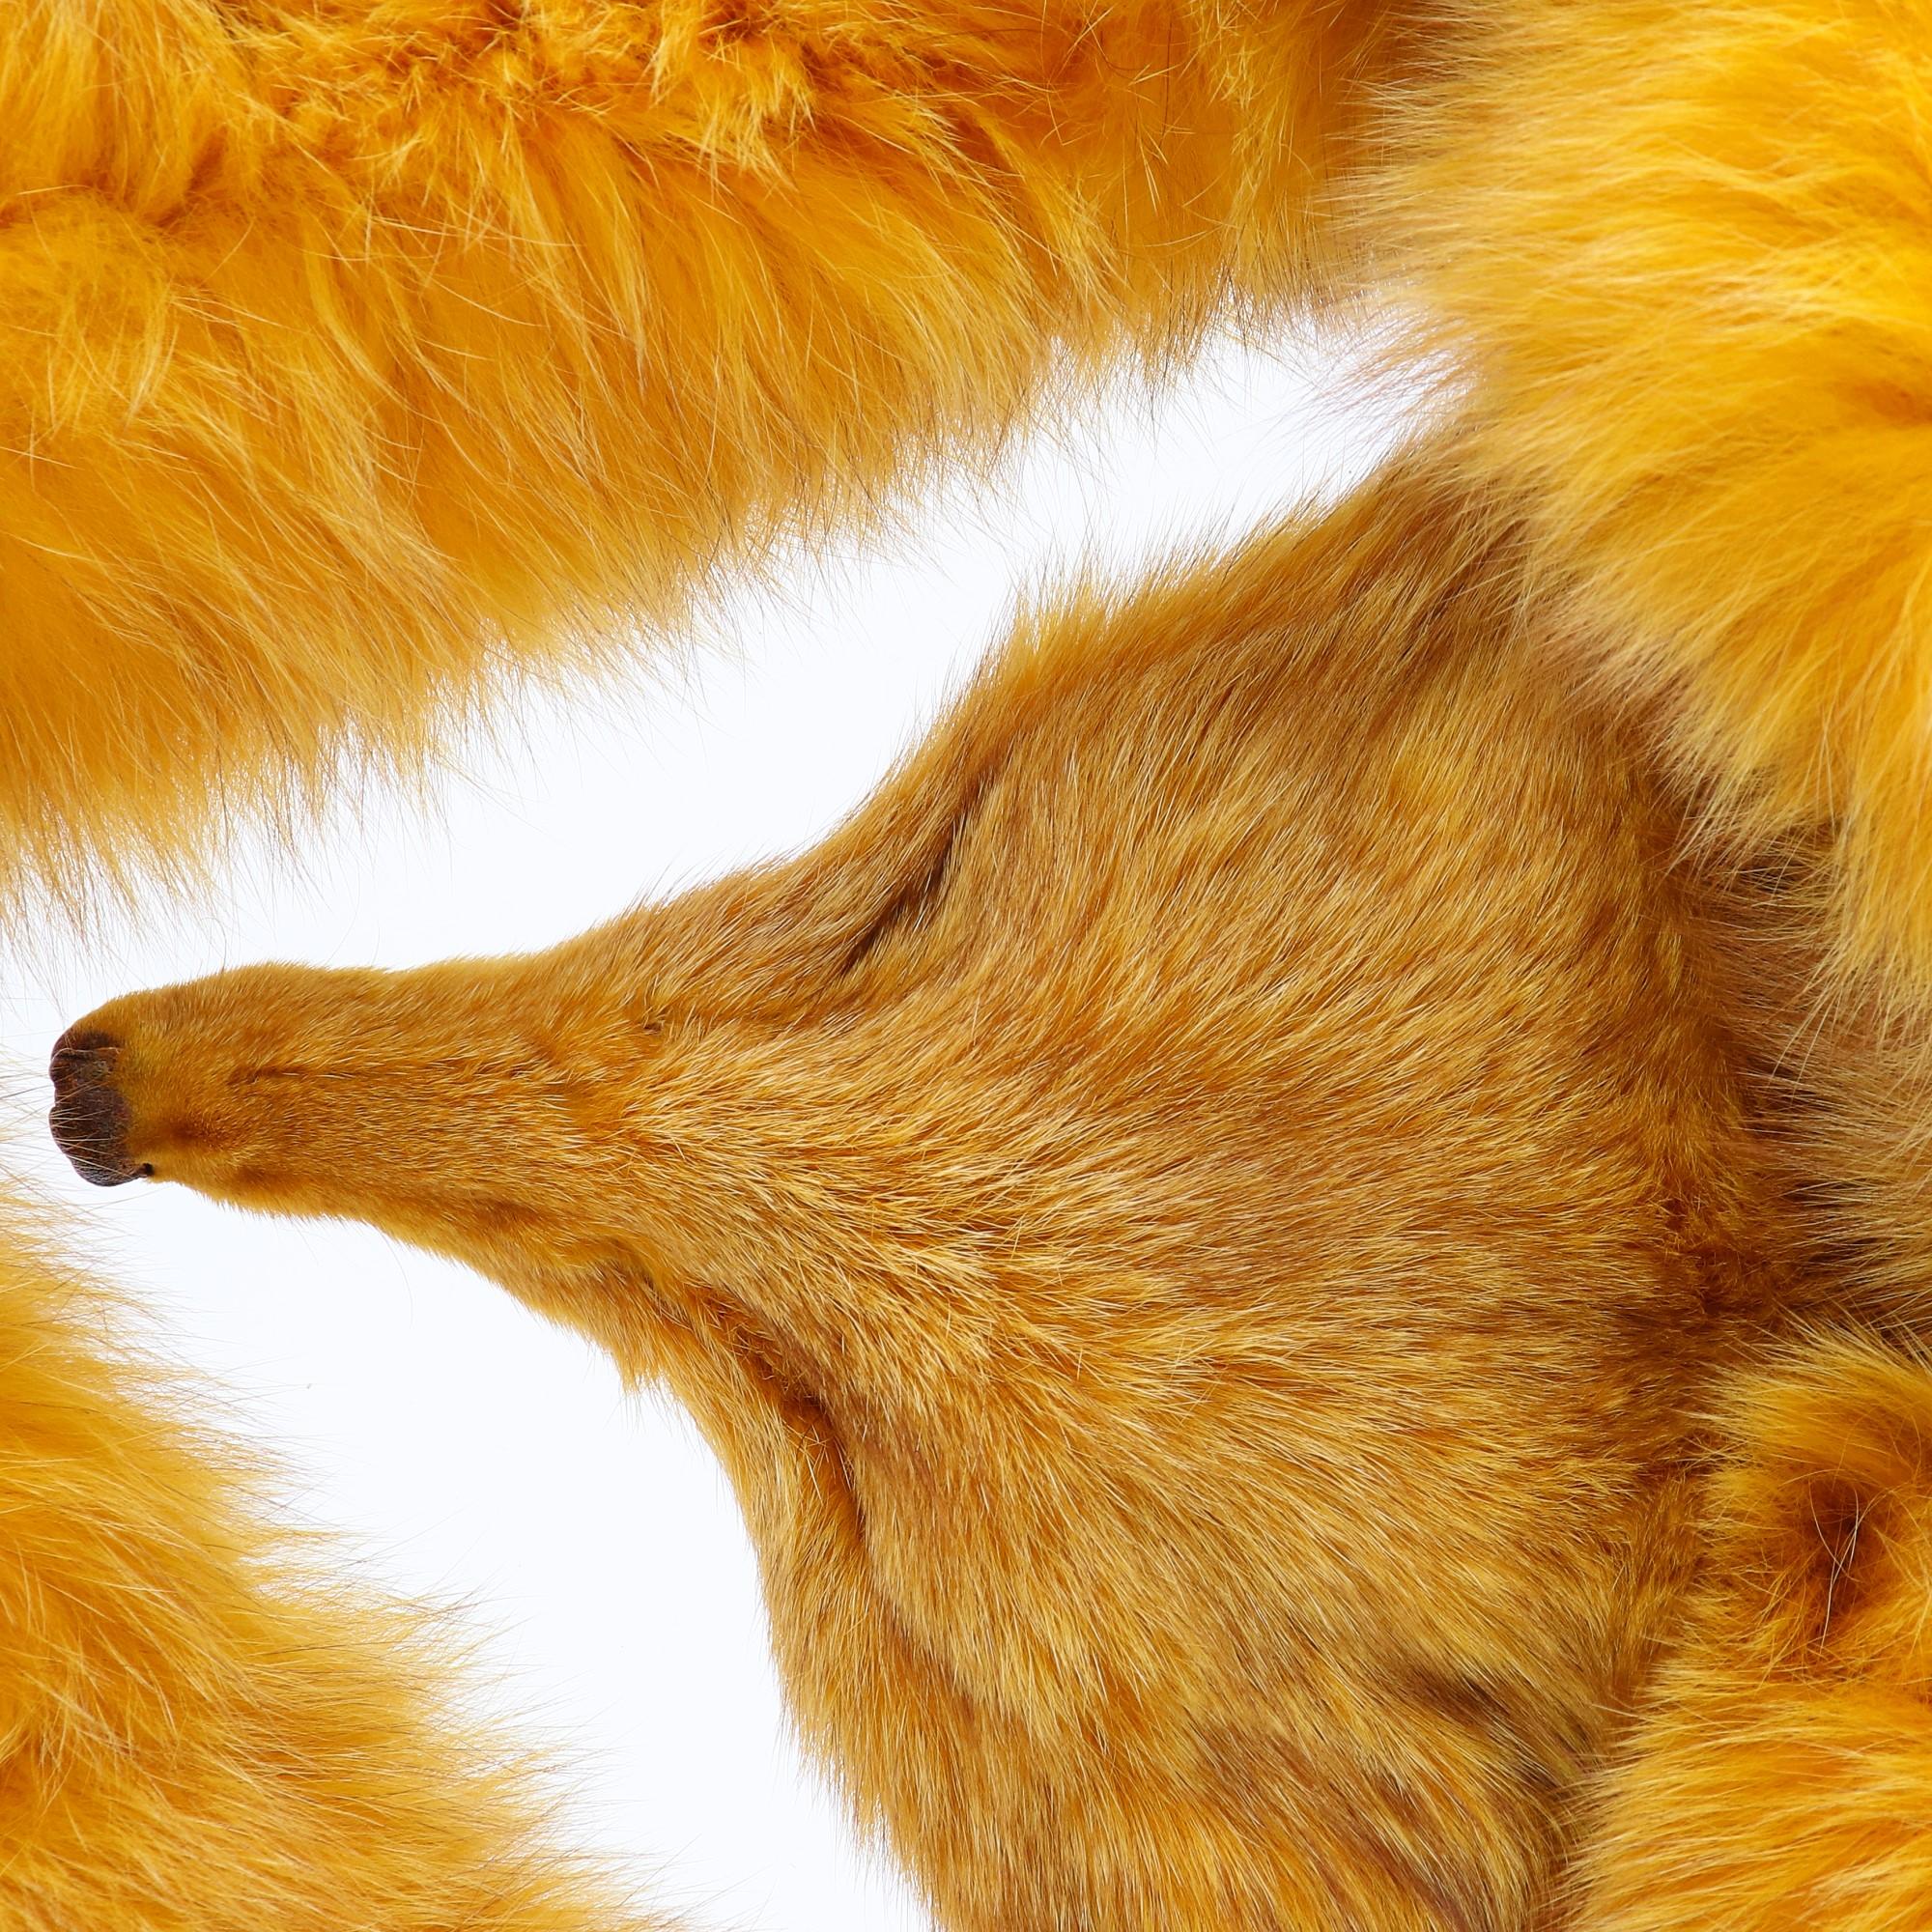 Carlo Tivioli scarf in saffron yellow real fox fur, made of two fox joined together, with tails at the ends and a muzzle. 70s vintage, Made in Italy, in perfect conditions.

Please note this item cannot be shipped outside the European Union.

Scarf